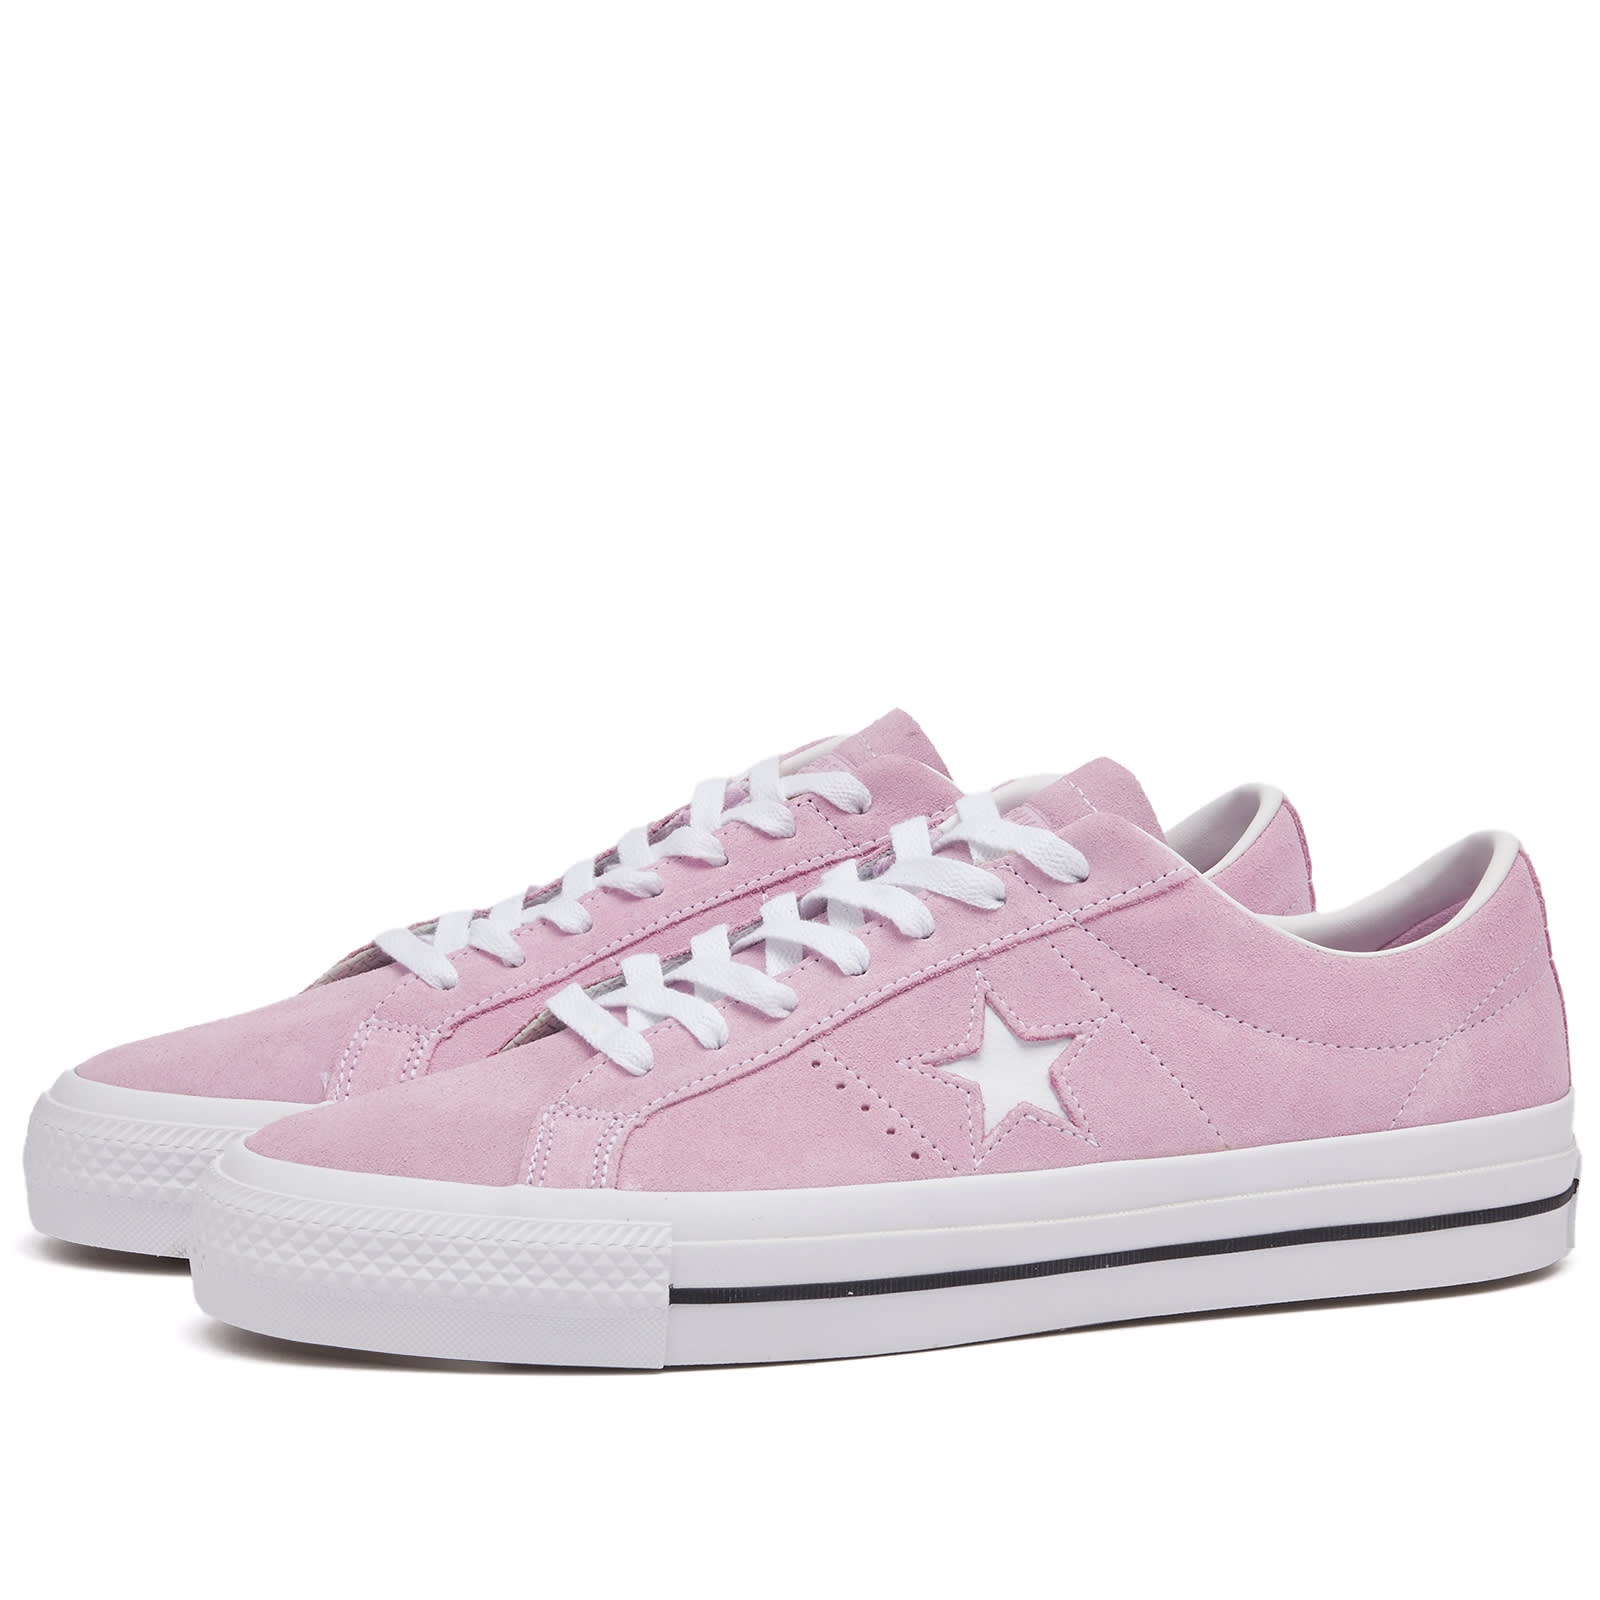 Converse Cons One Star Pro - 1